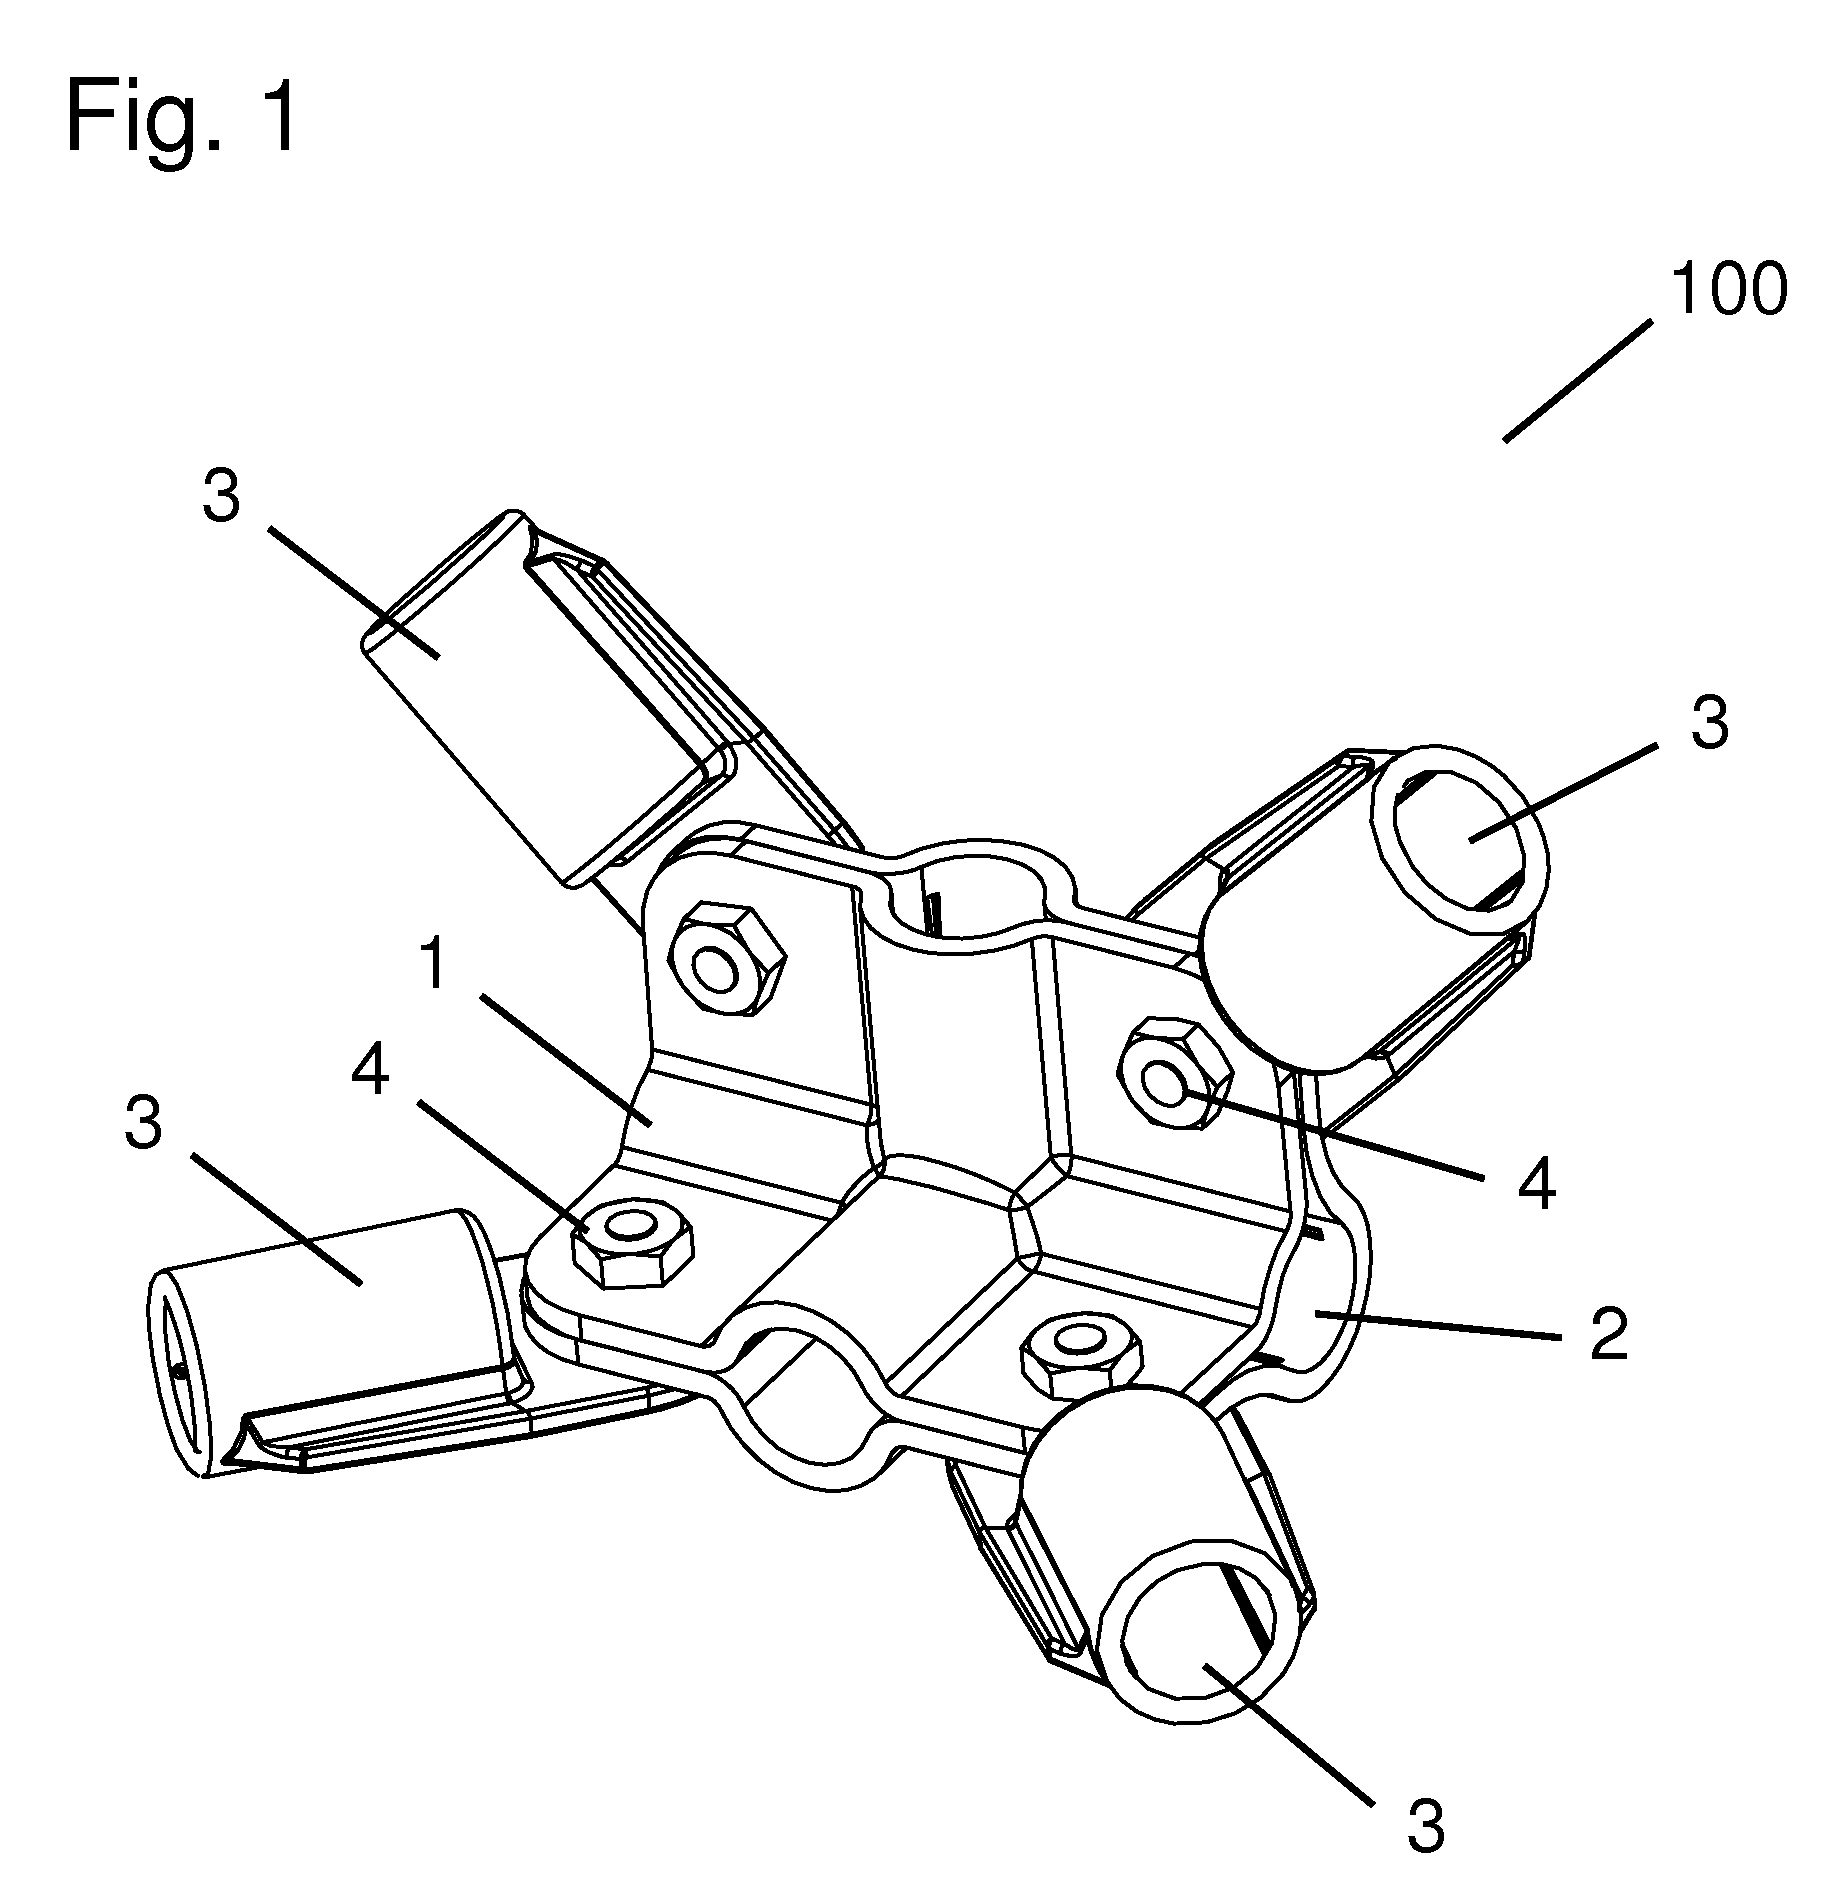 3-dimensional universal tube connector system